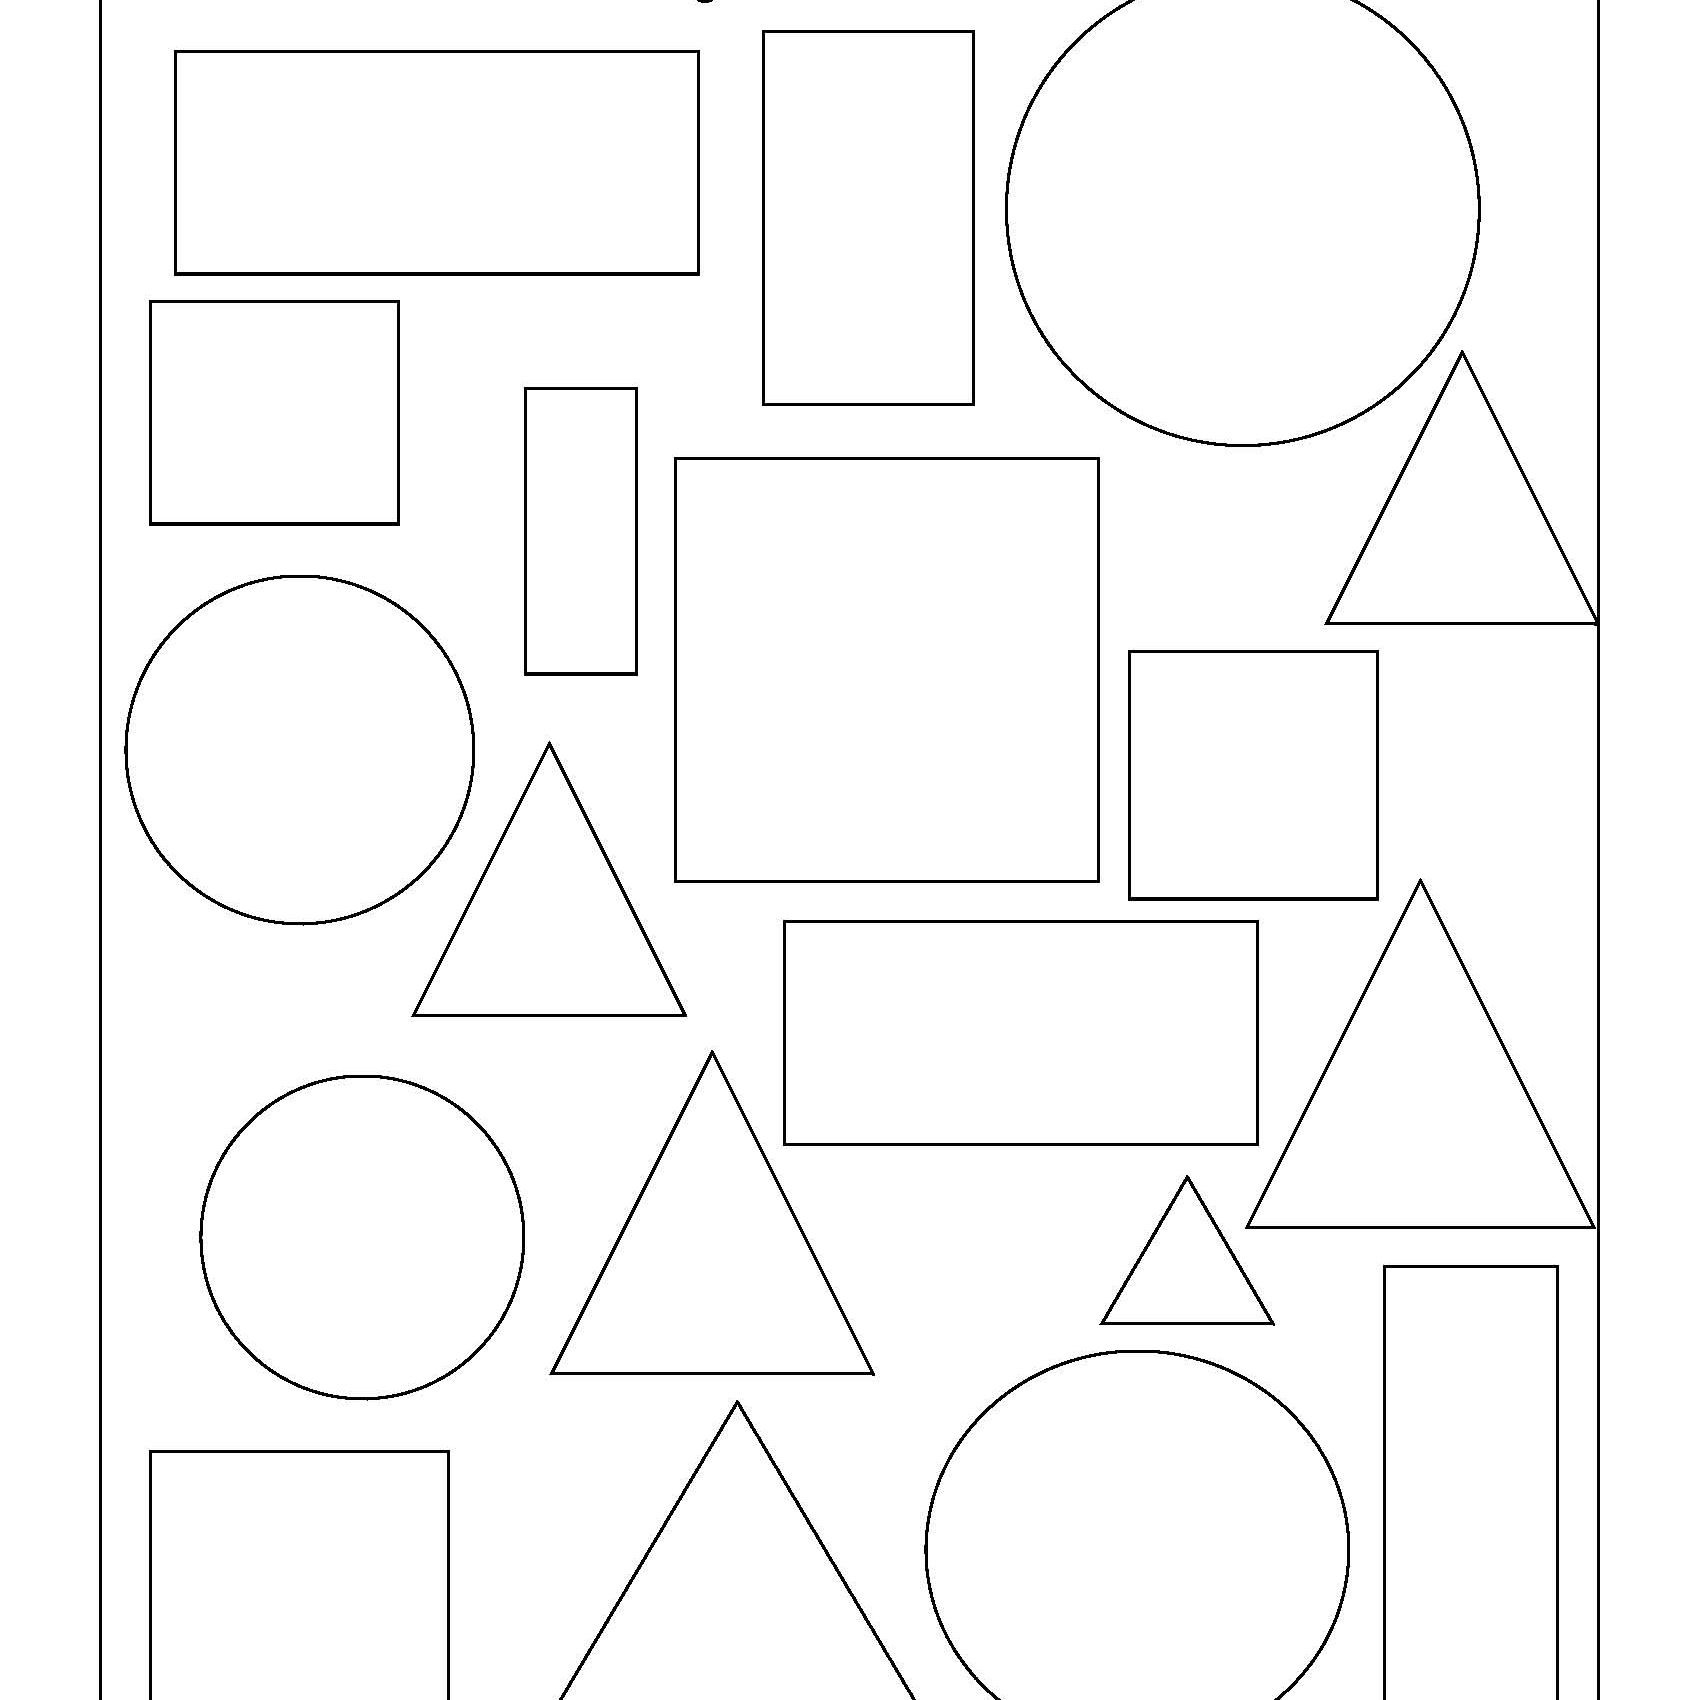 geometry-worksheets-for-students-in-1st-grade-db-excel